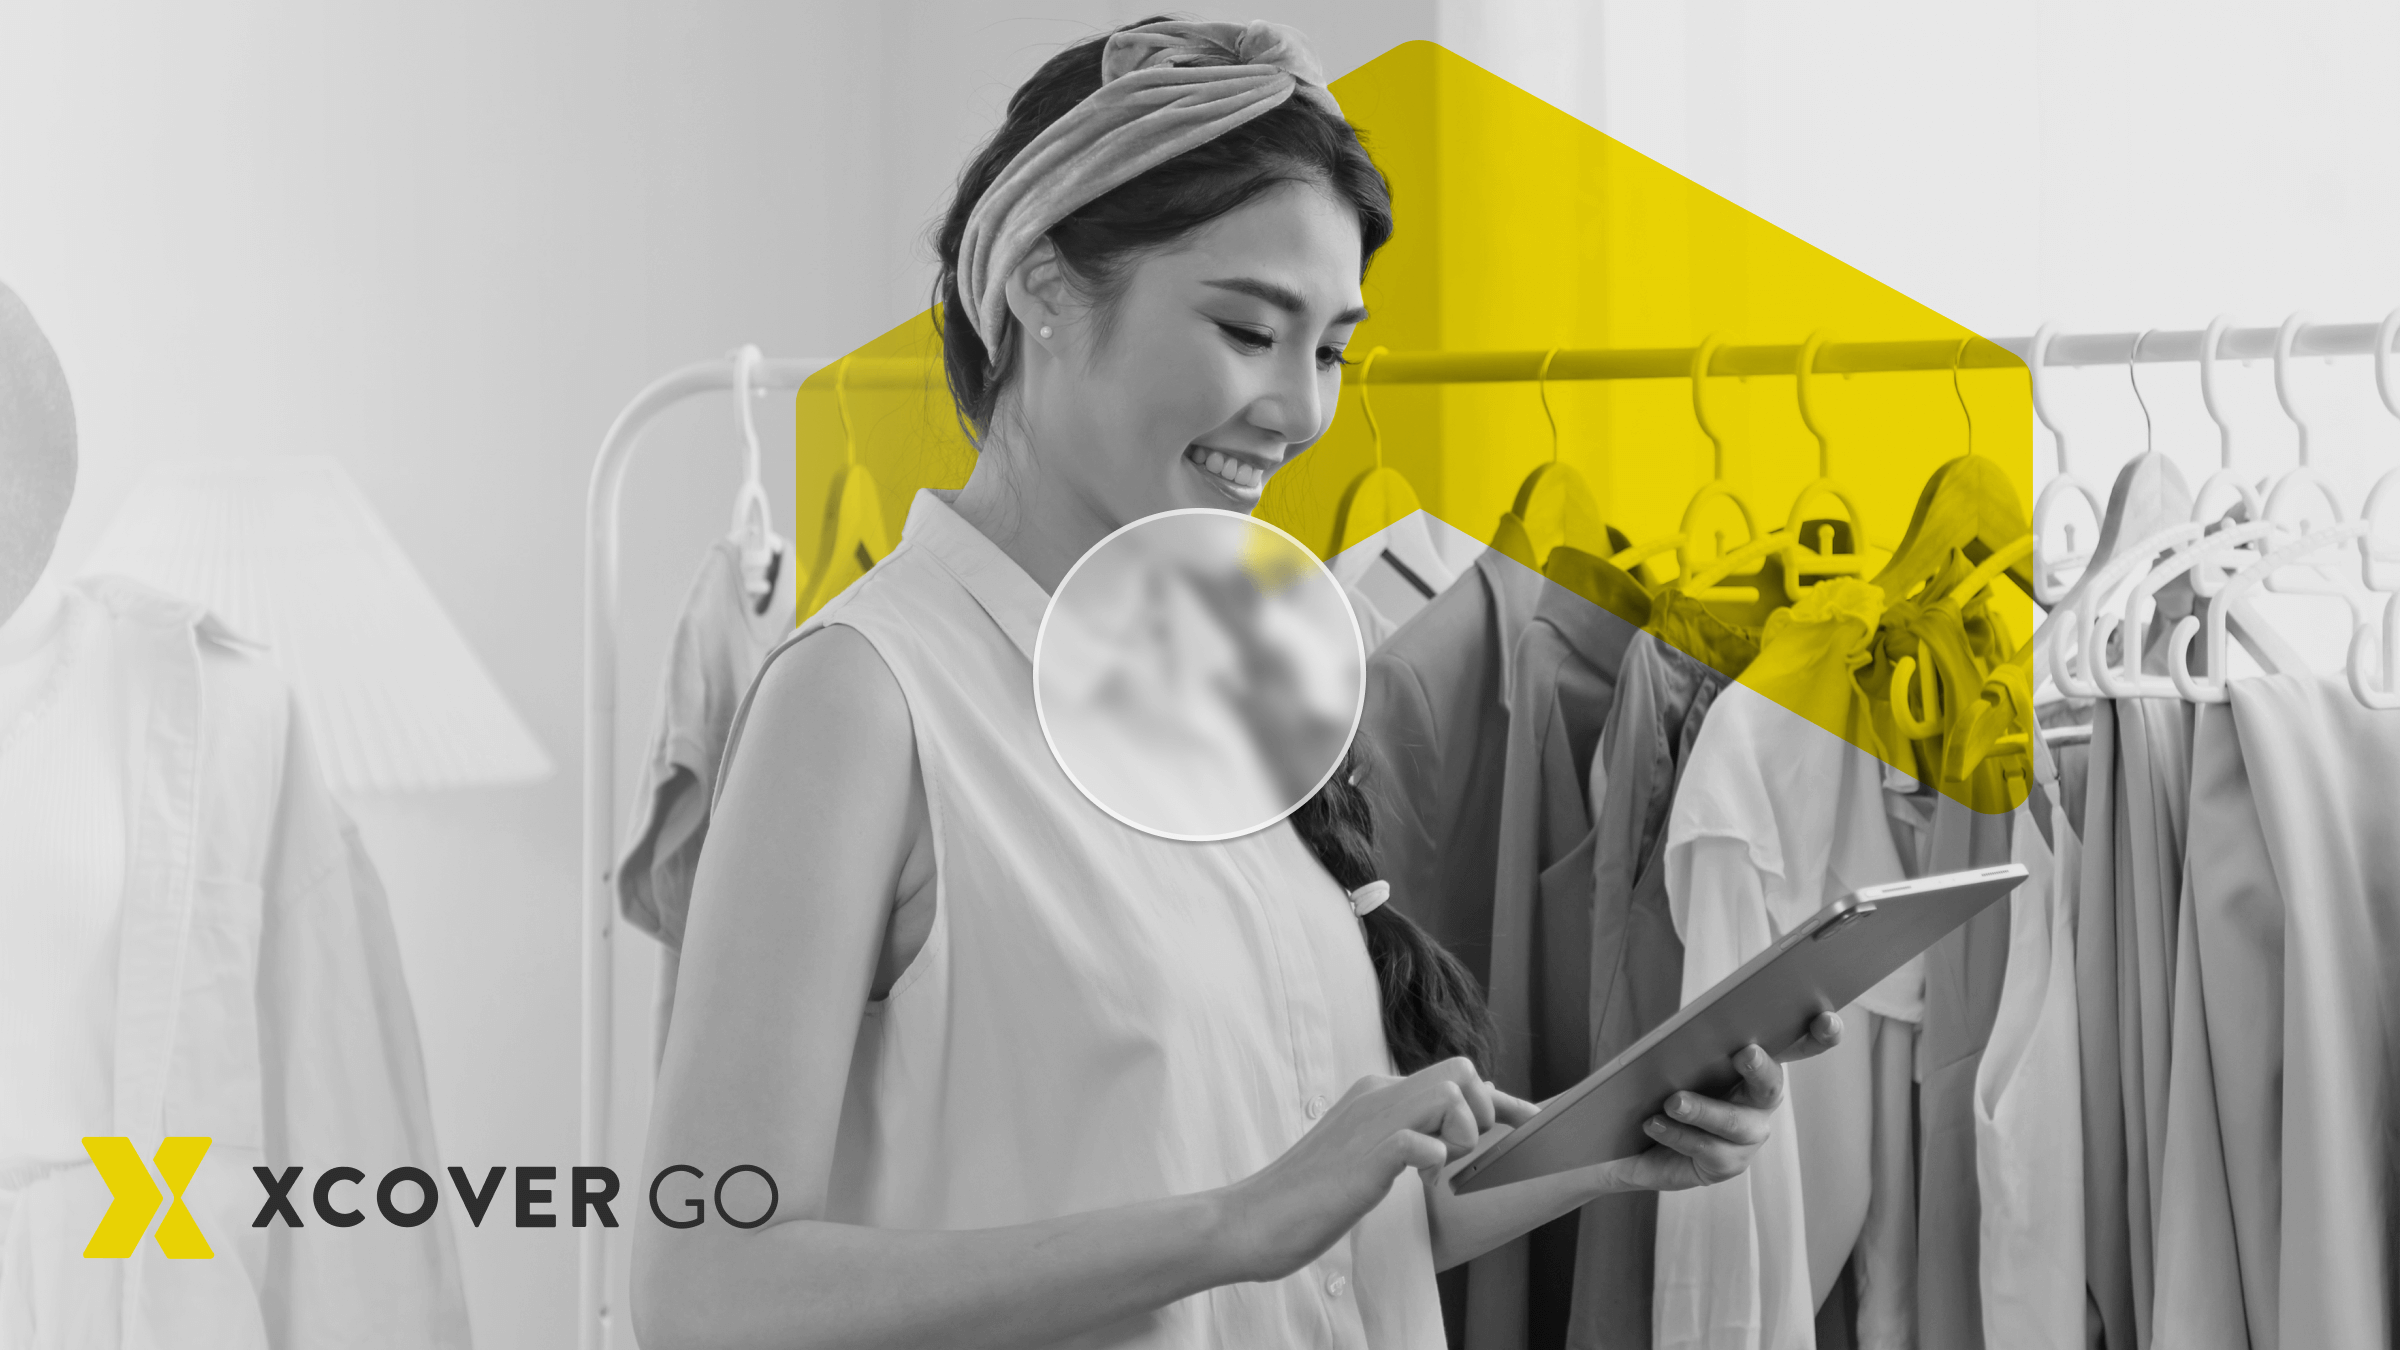 Boost revenue and increase customer lifetime value with XCover Go